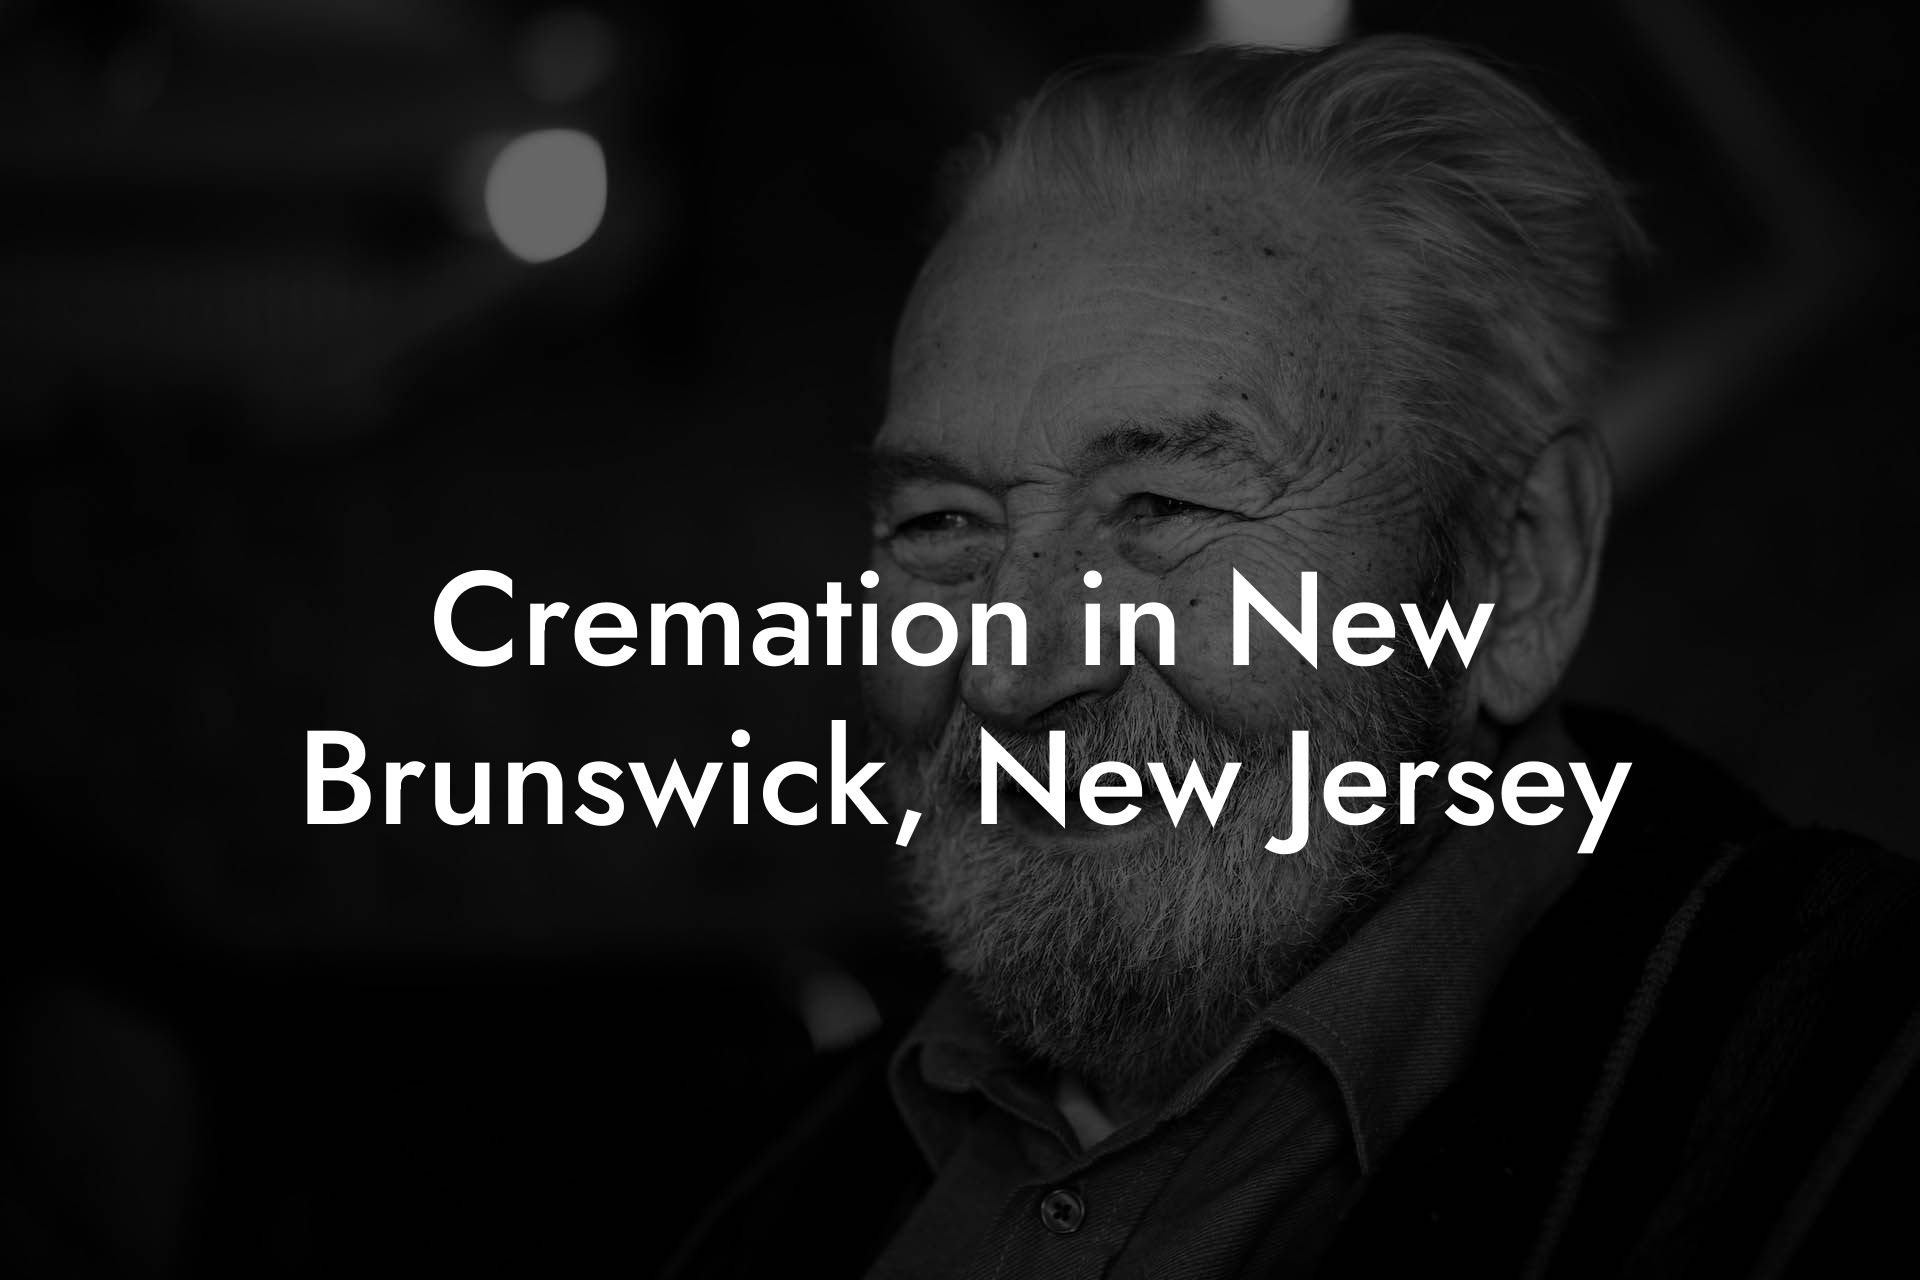 Cremation in New Brunswick, New Jersey